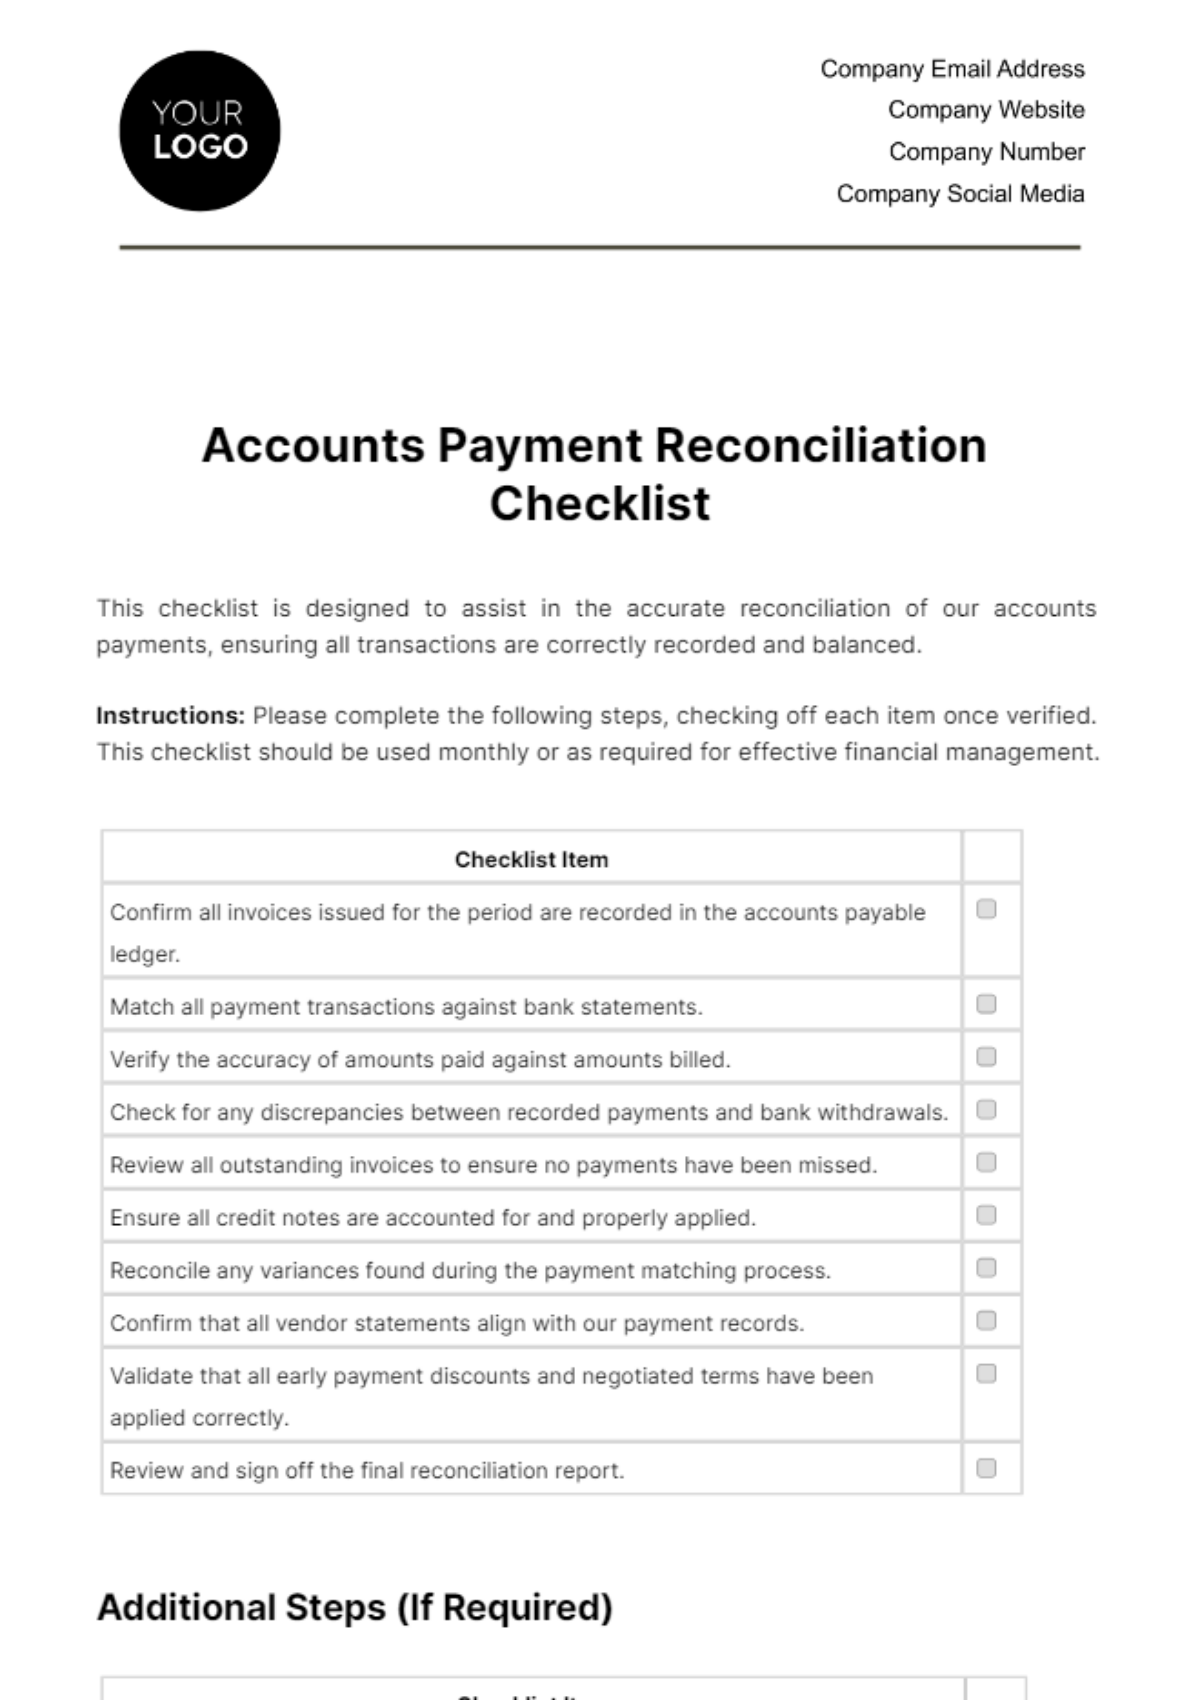 Free Accounts Payment Reconciliation Checklist Template